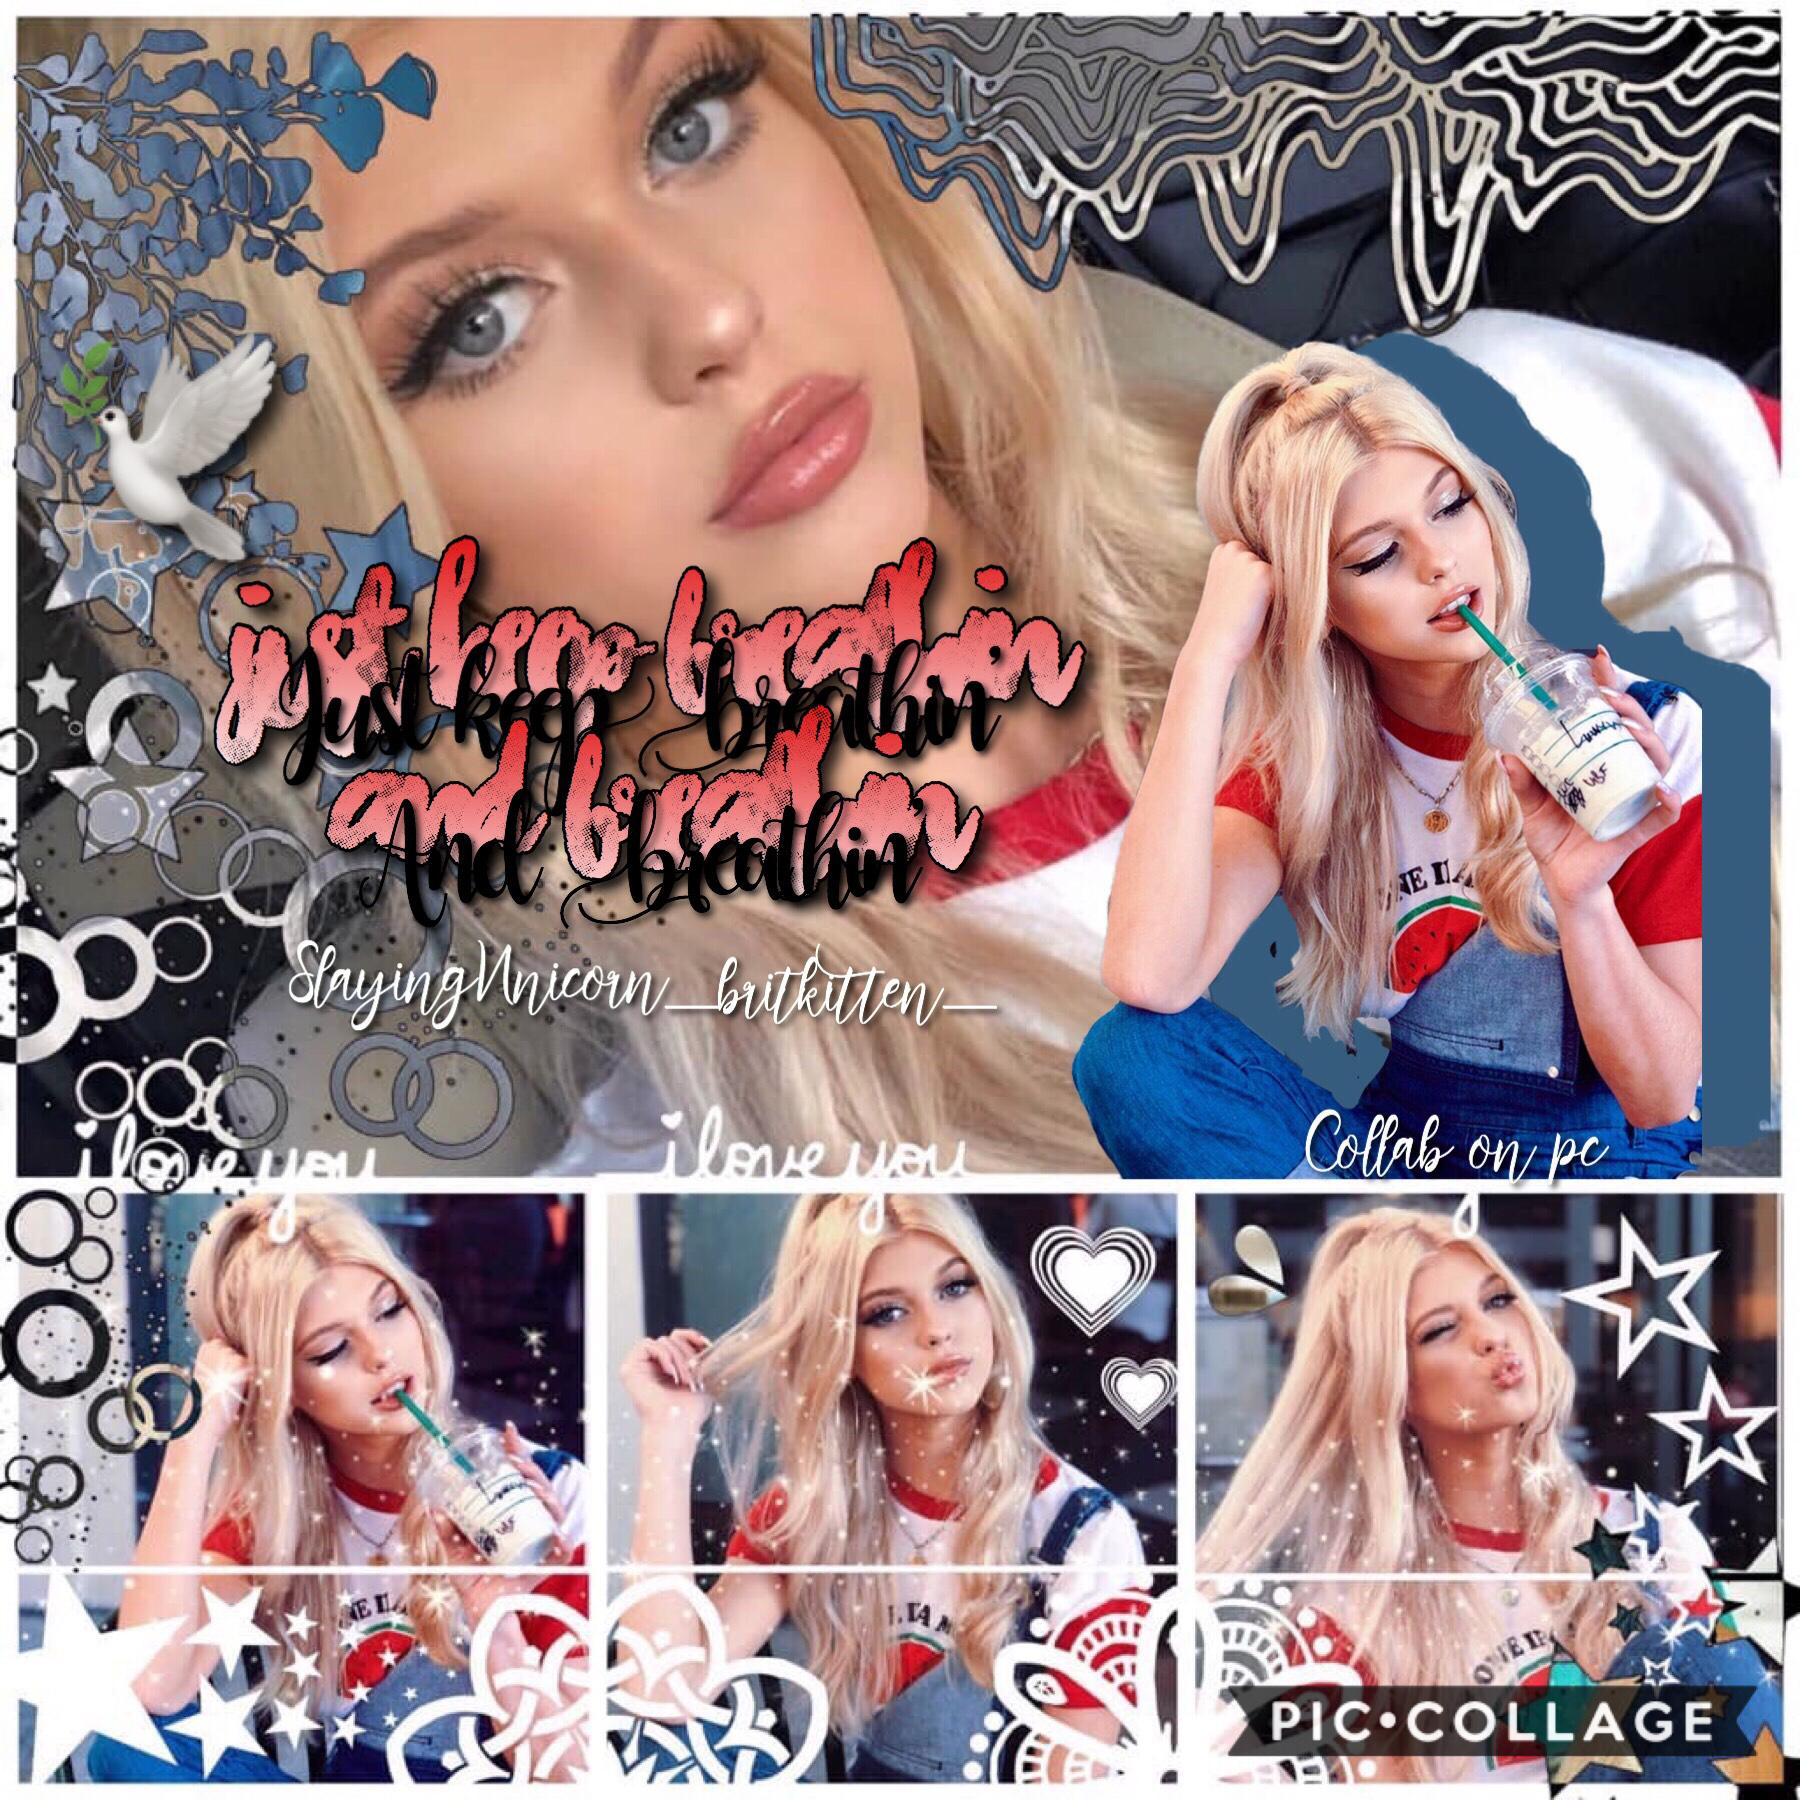 This is a collab with my bestie _britkitten_ 🌸🦋Go follow her, she is amazing💗#BritUnicorns🦄